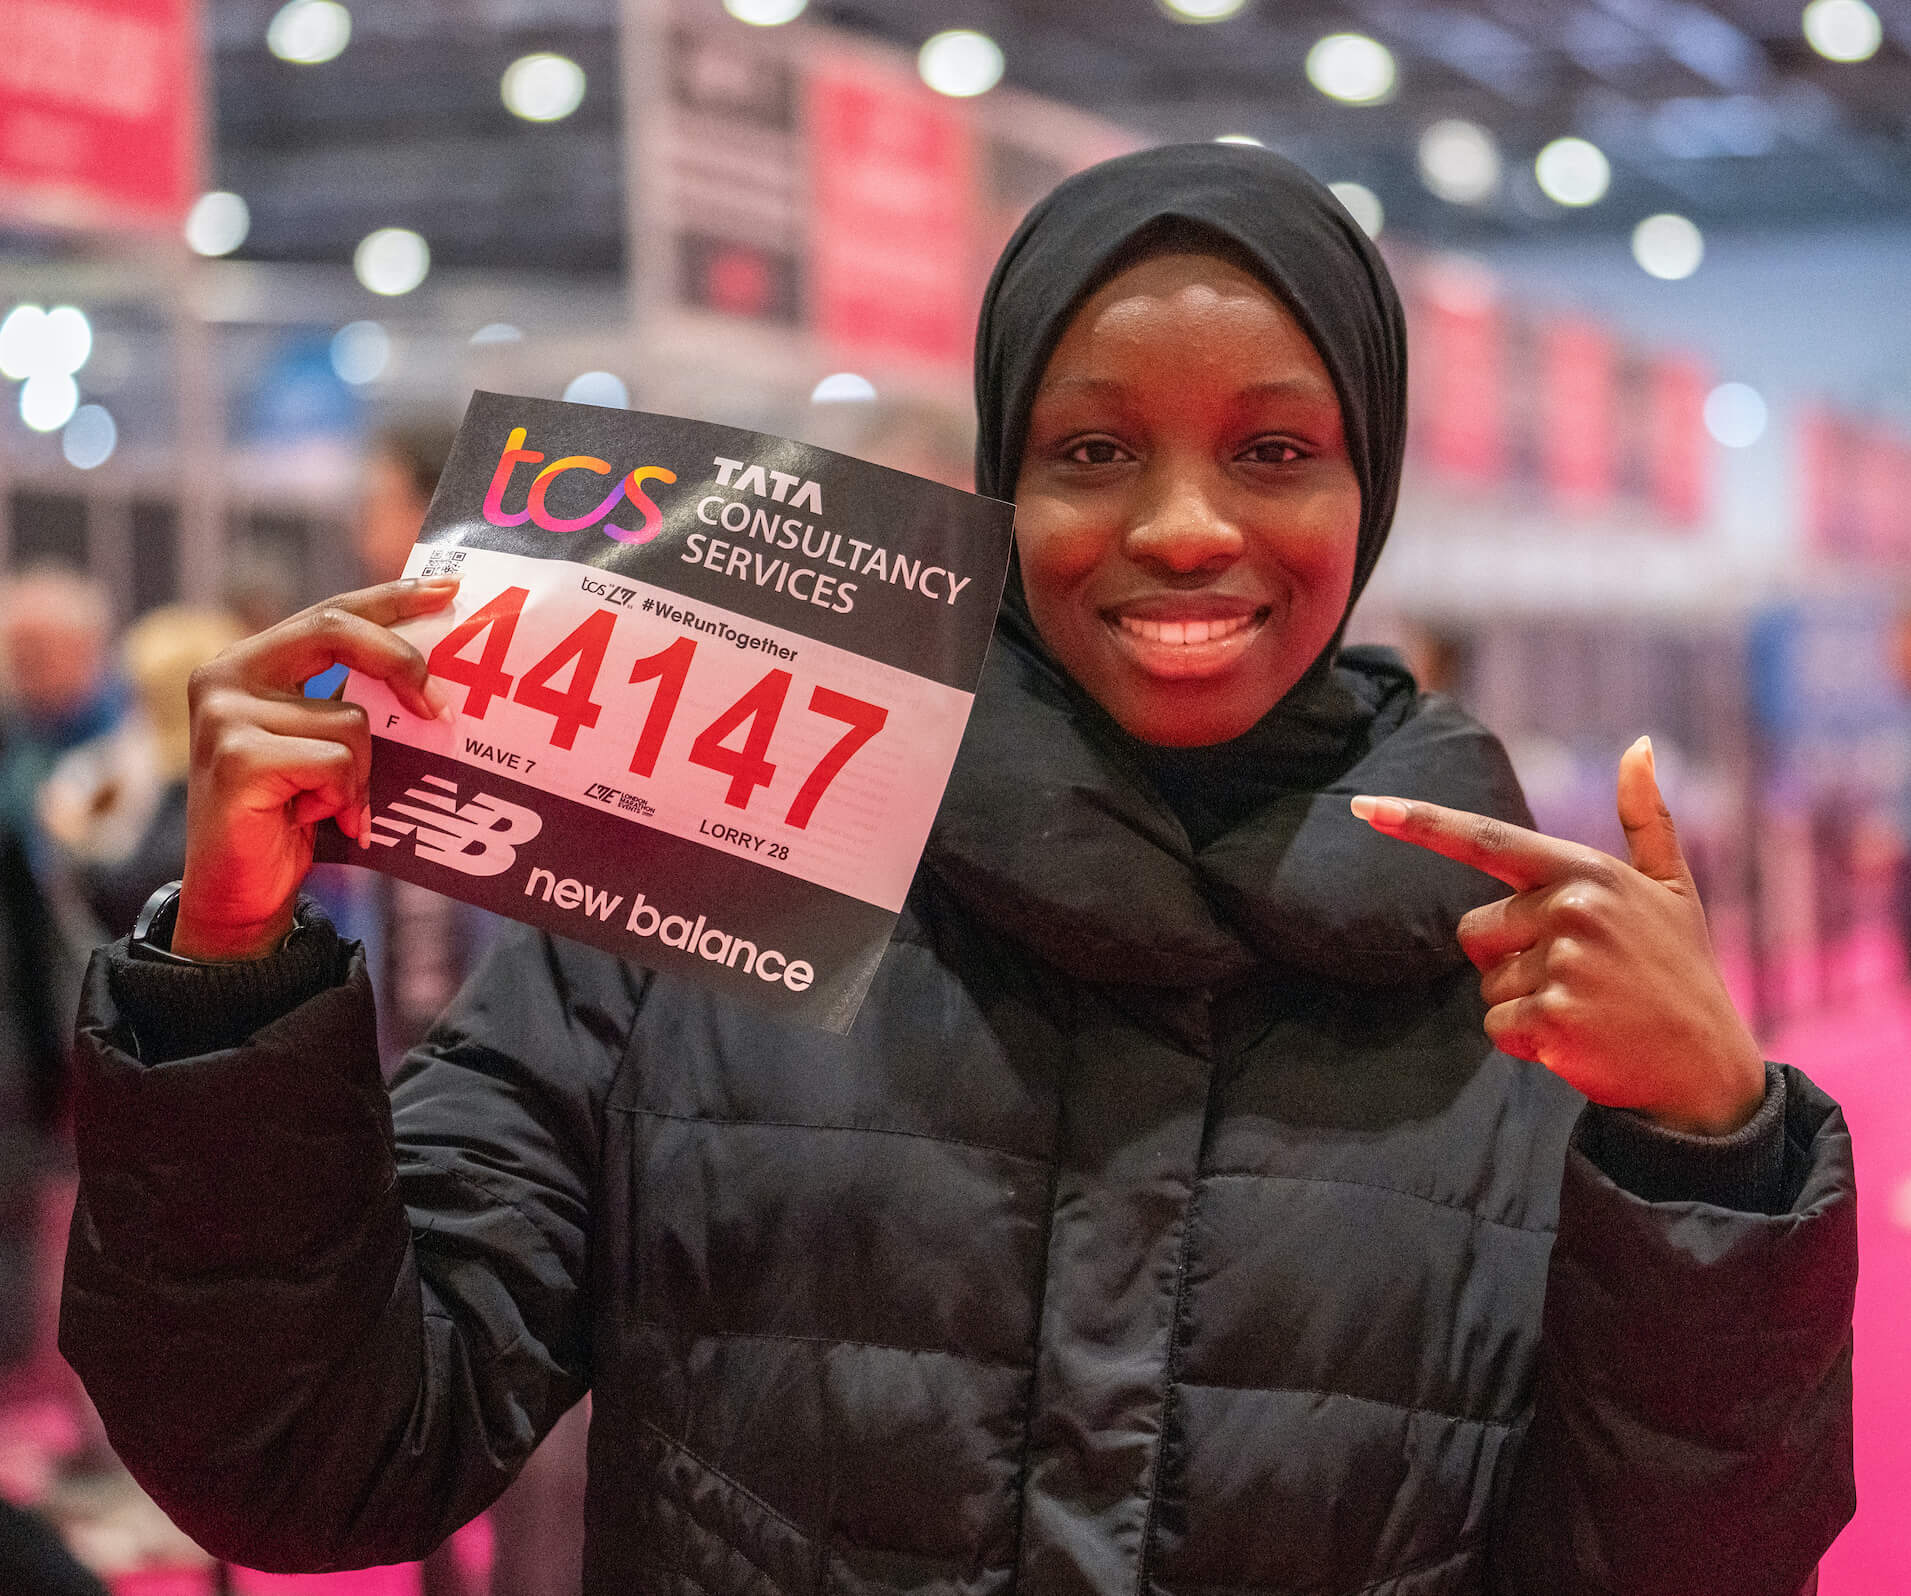 A TCS London Marathon participant holds their bib at the Running Show